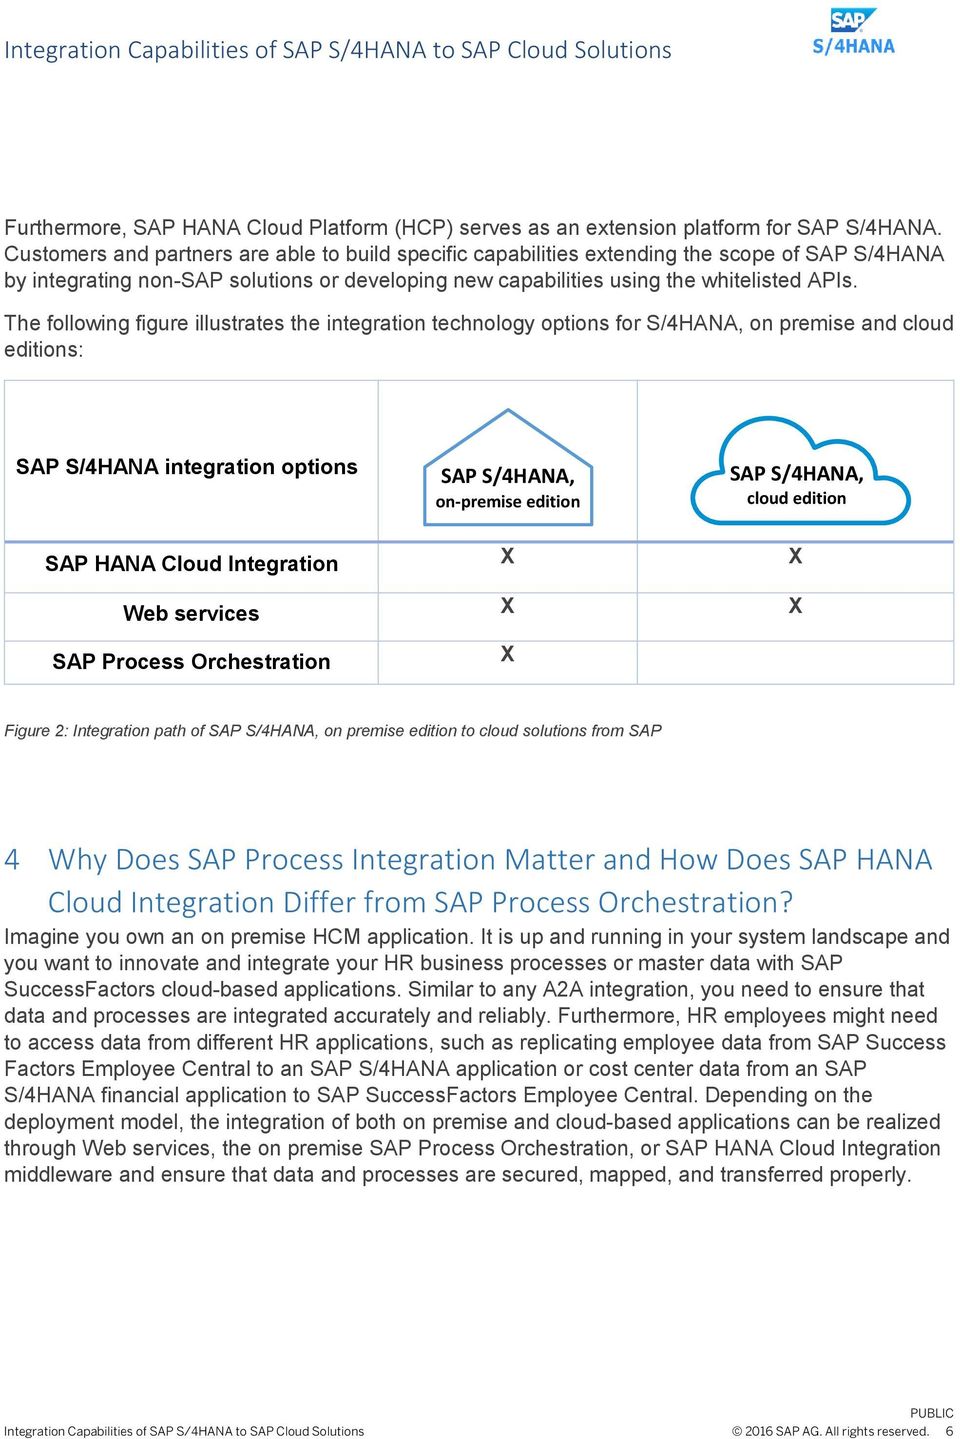 The following figure illustrates the integration technology options for S/4HANA, on premise and cloud editions: SAP S/4HANA integration options SAP S/4HANA, on-premise edition SAP S/4HANA, cloud